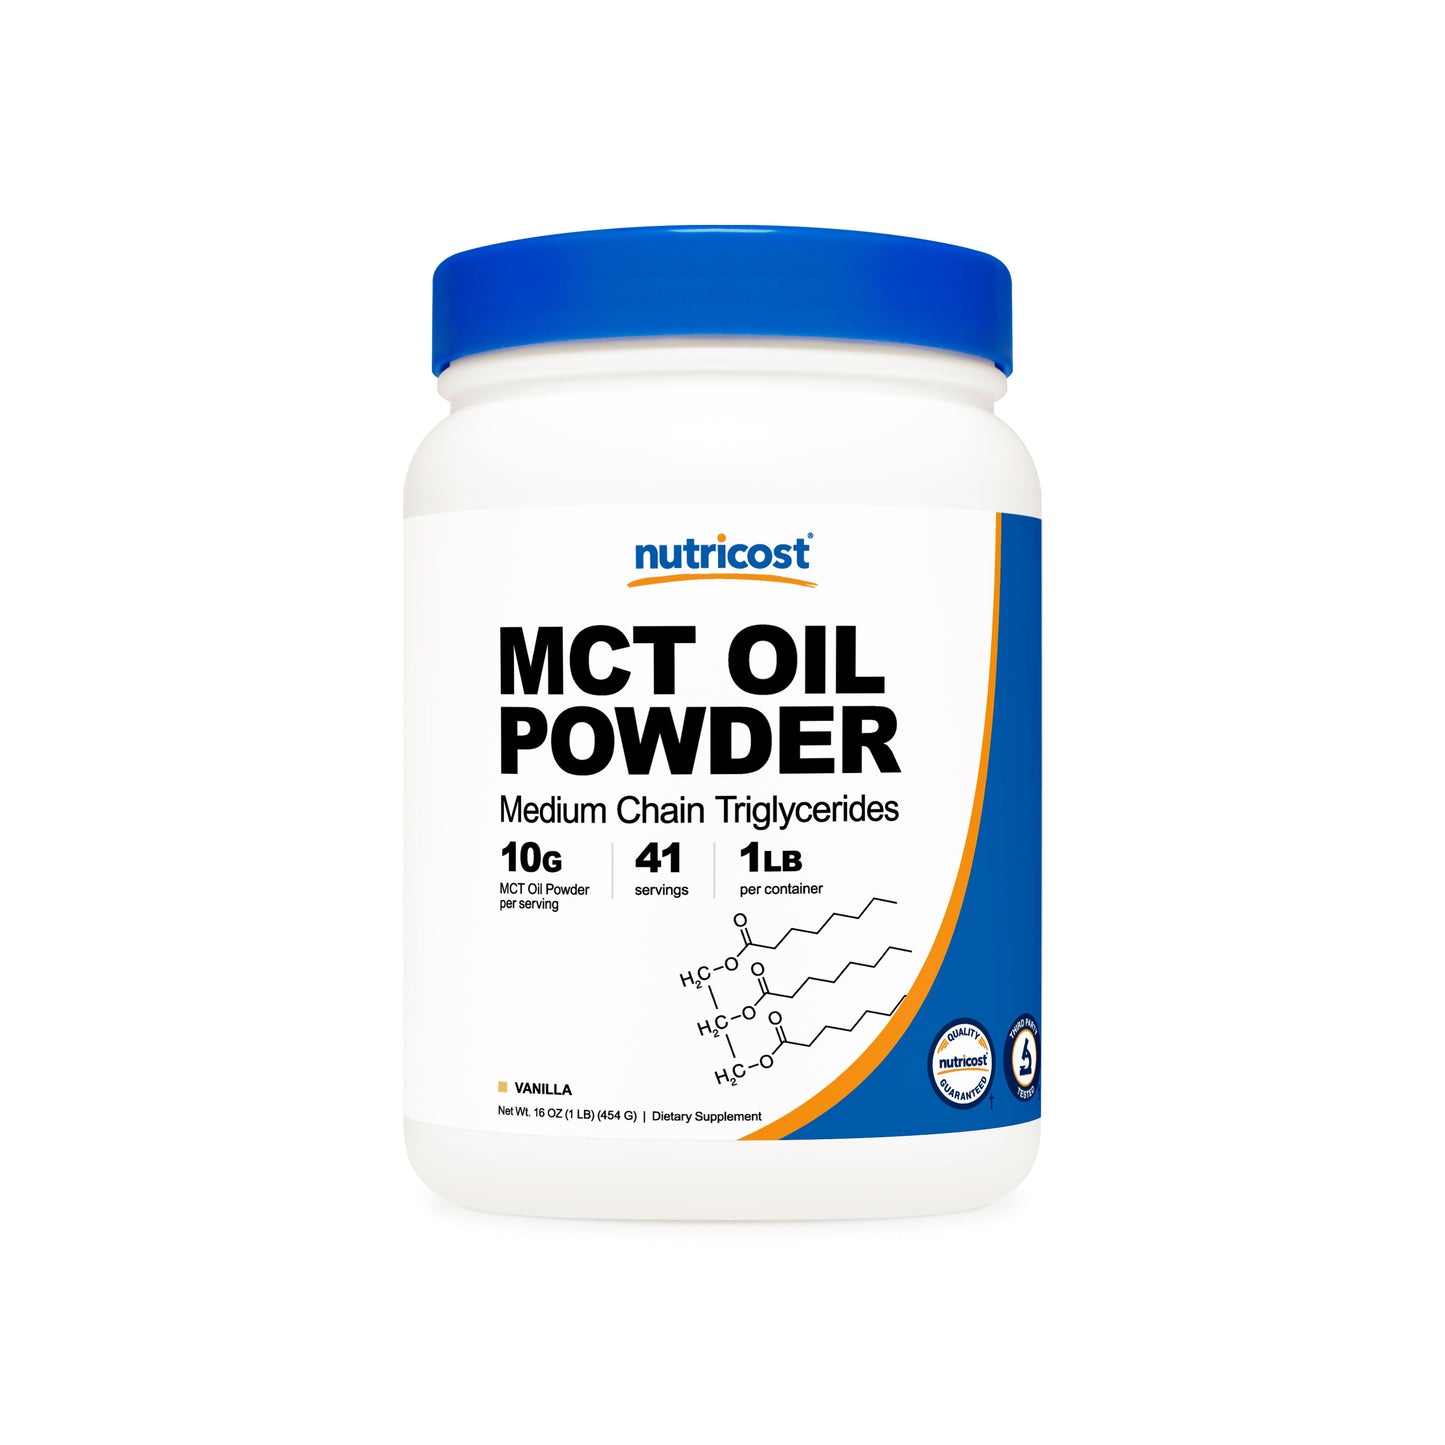 Nutricost MCT Oil Powder